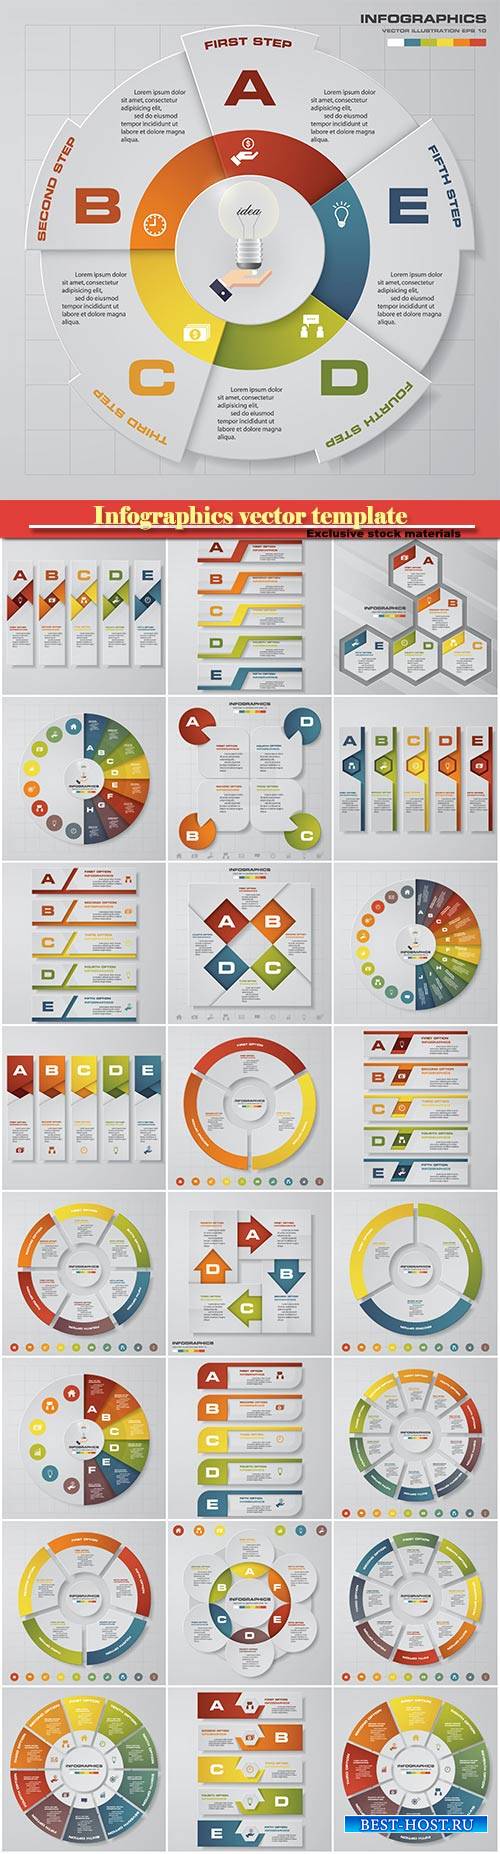 Infographics vector template for business presentations or information bann ...